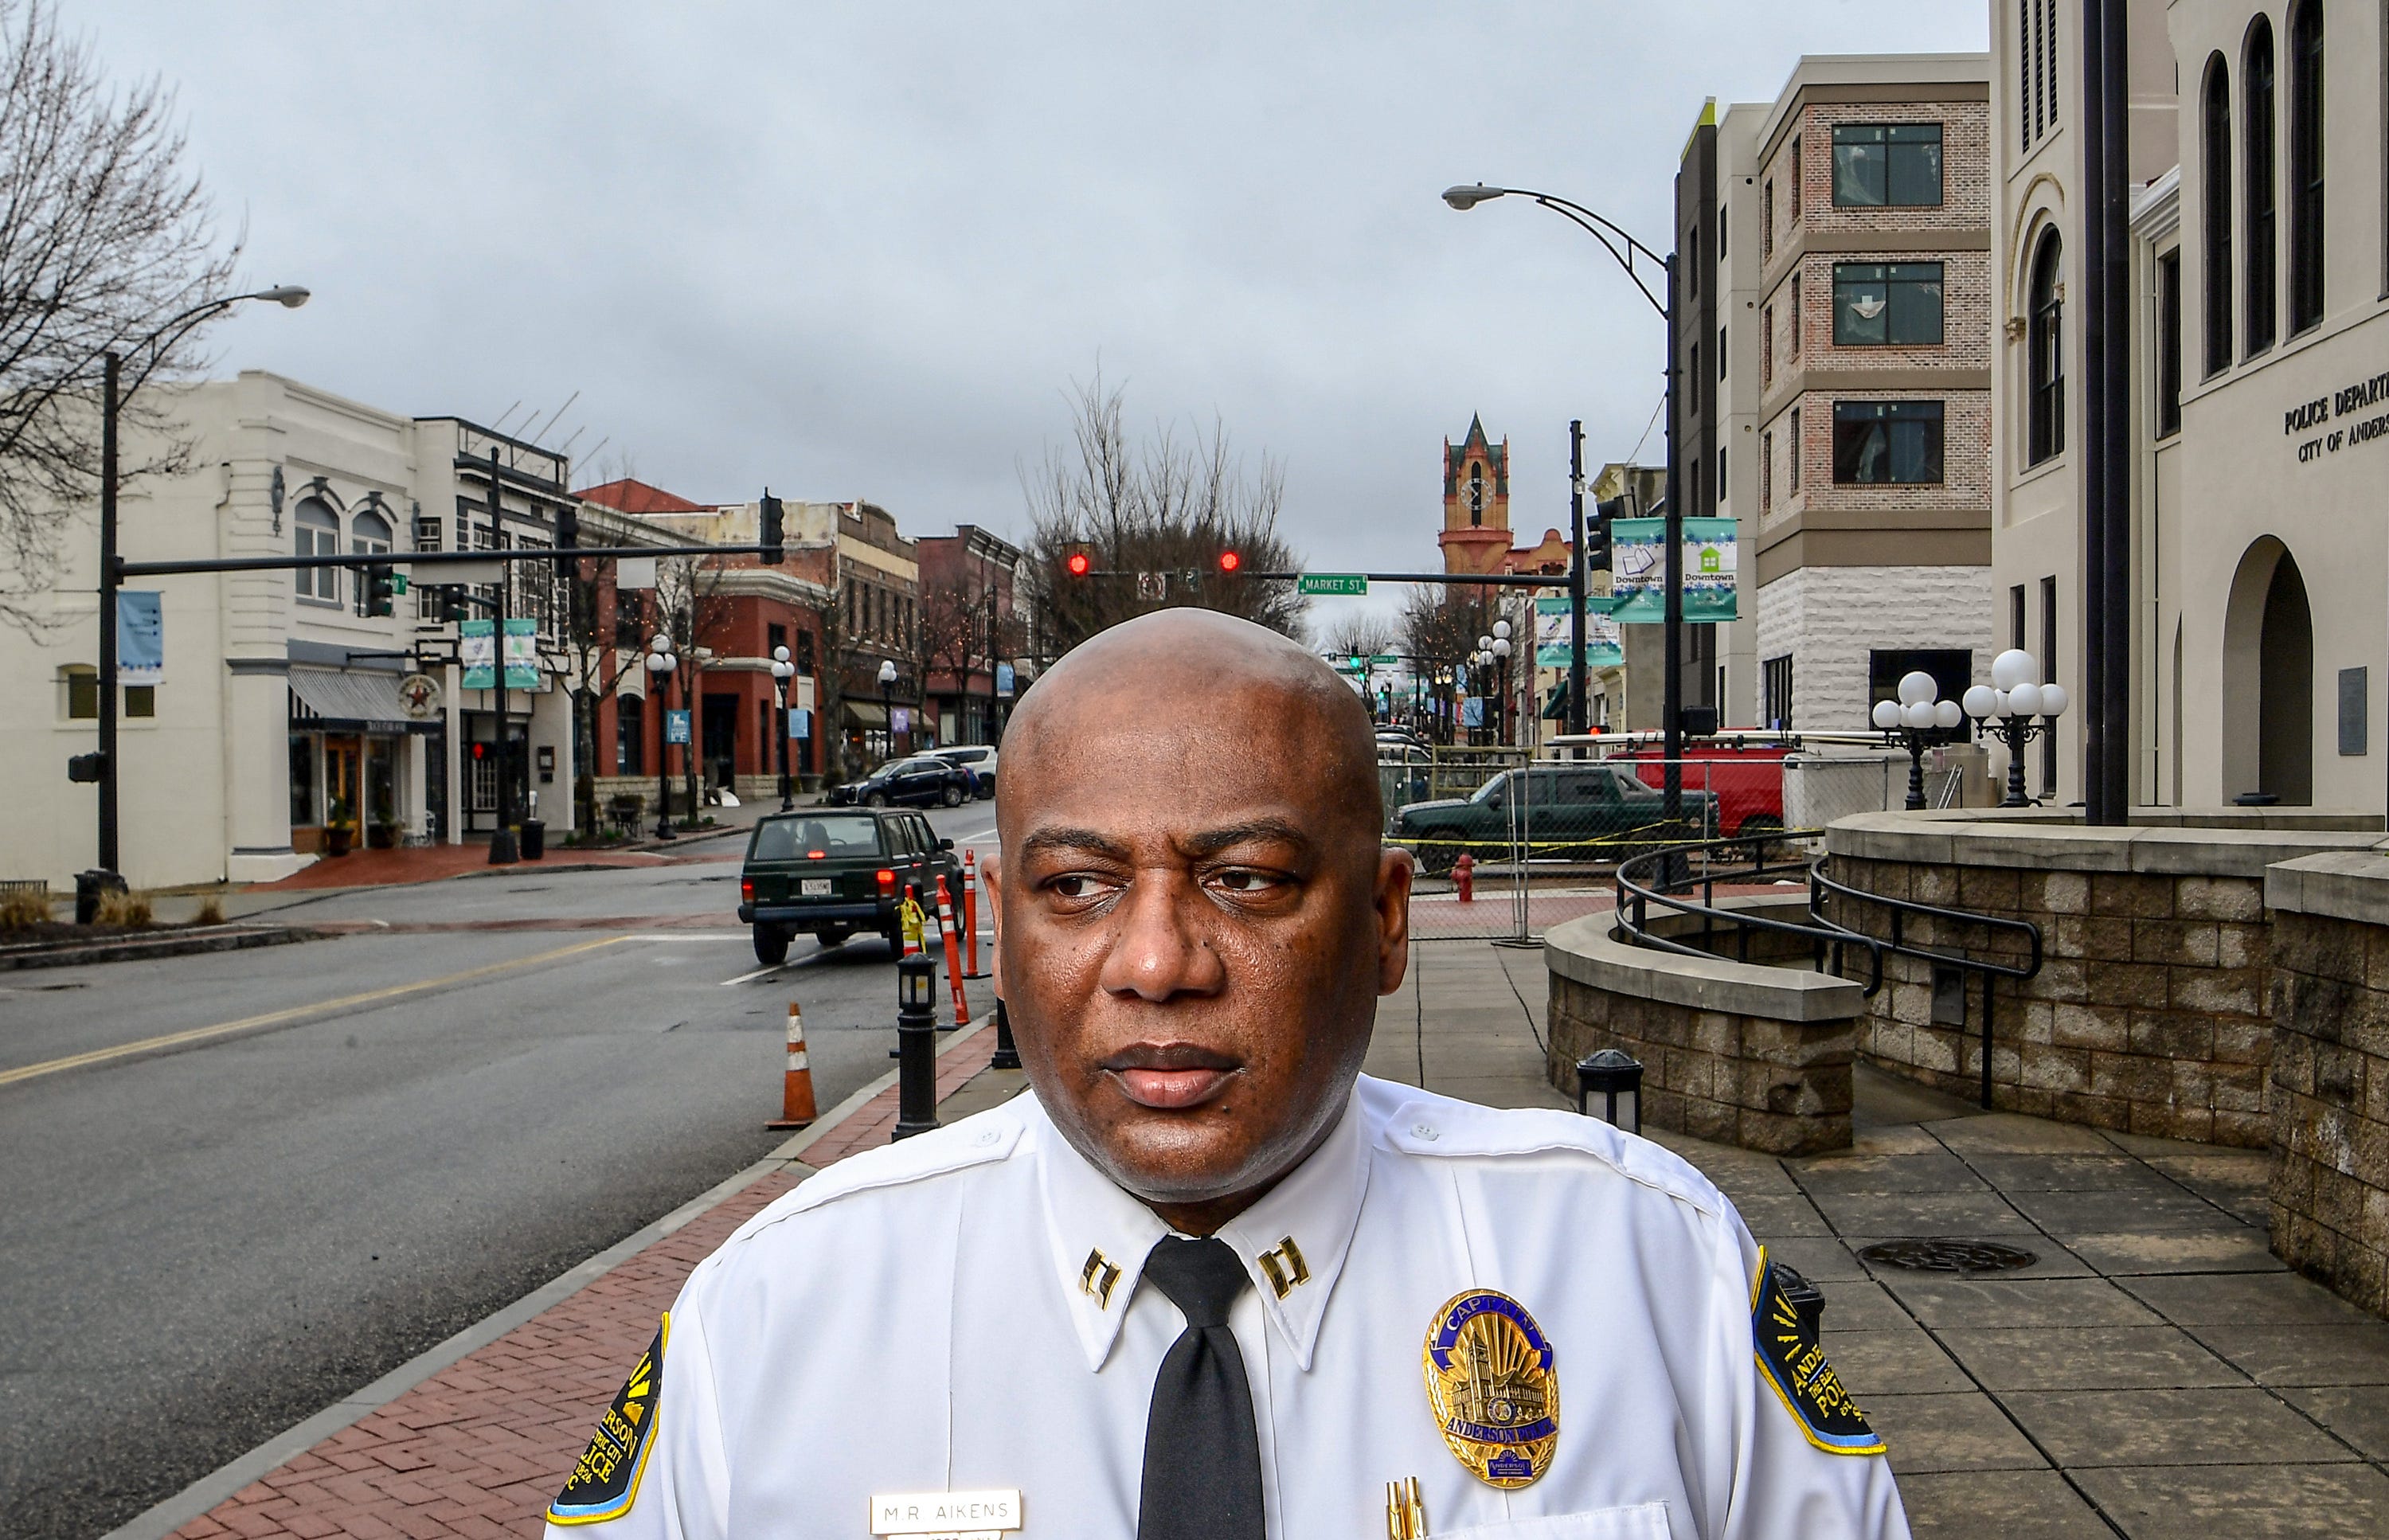 Capt. Mike Aikens says his work in Anderson has changed over the years and through his career as an officer. He does caution his own sons to be careful. "Everybody ain't bad, but there are still some people who are going to follow you or stop you just because of the color of your skin."